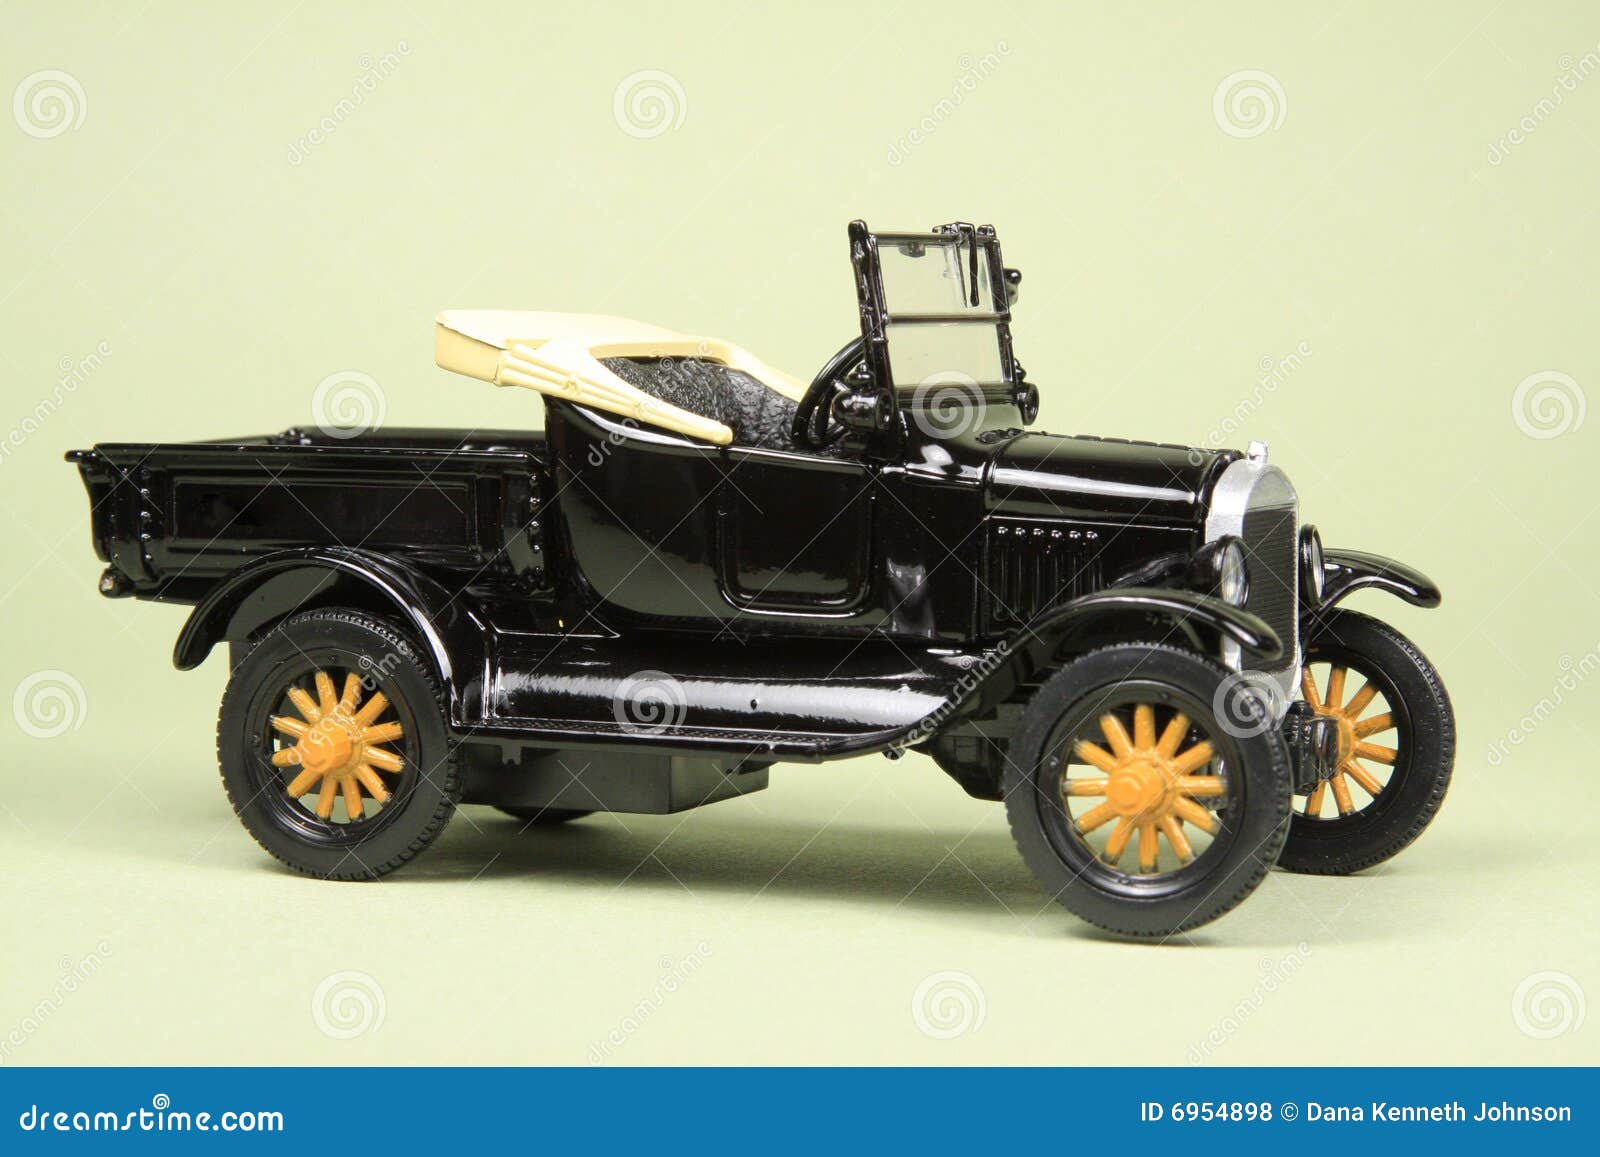 Payment plans for the ford model t #5